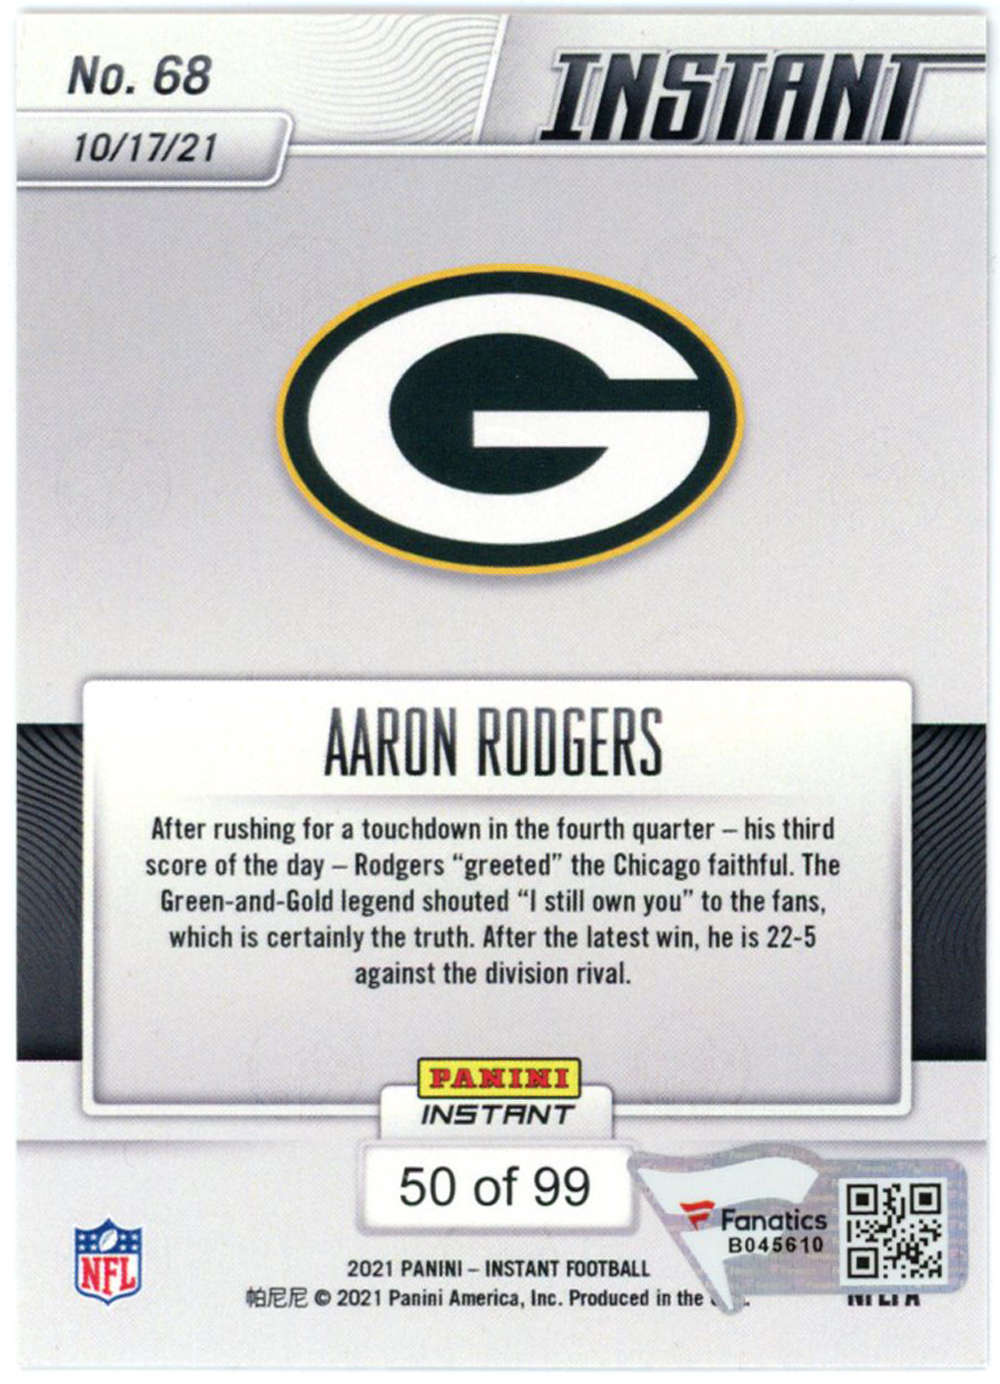 Aaron Rodgers Signed 2021 Panini Instant #50/99 Trading Card FAN